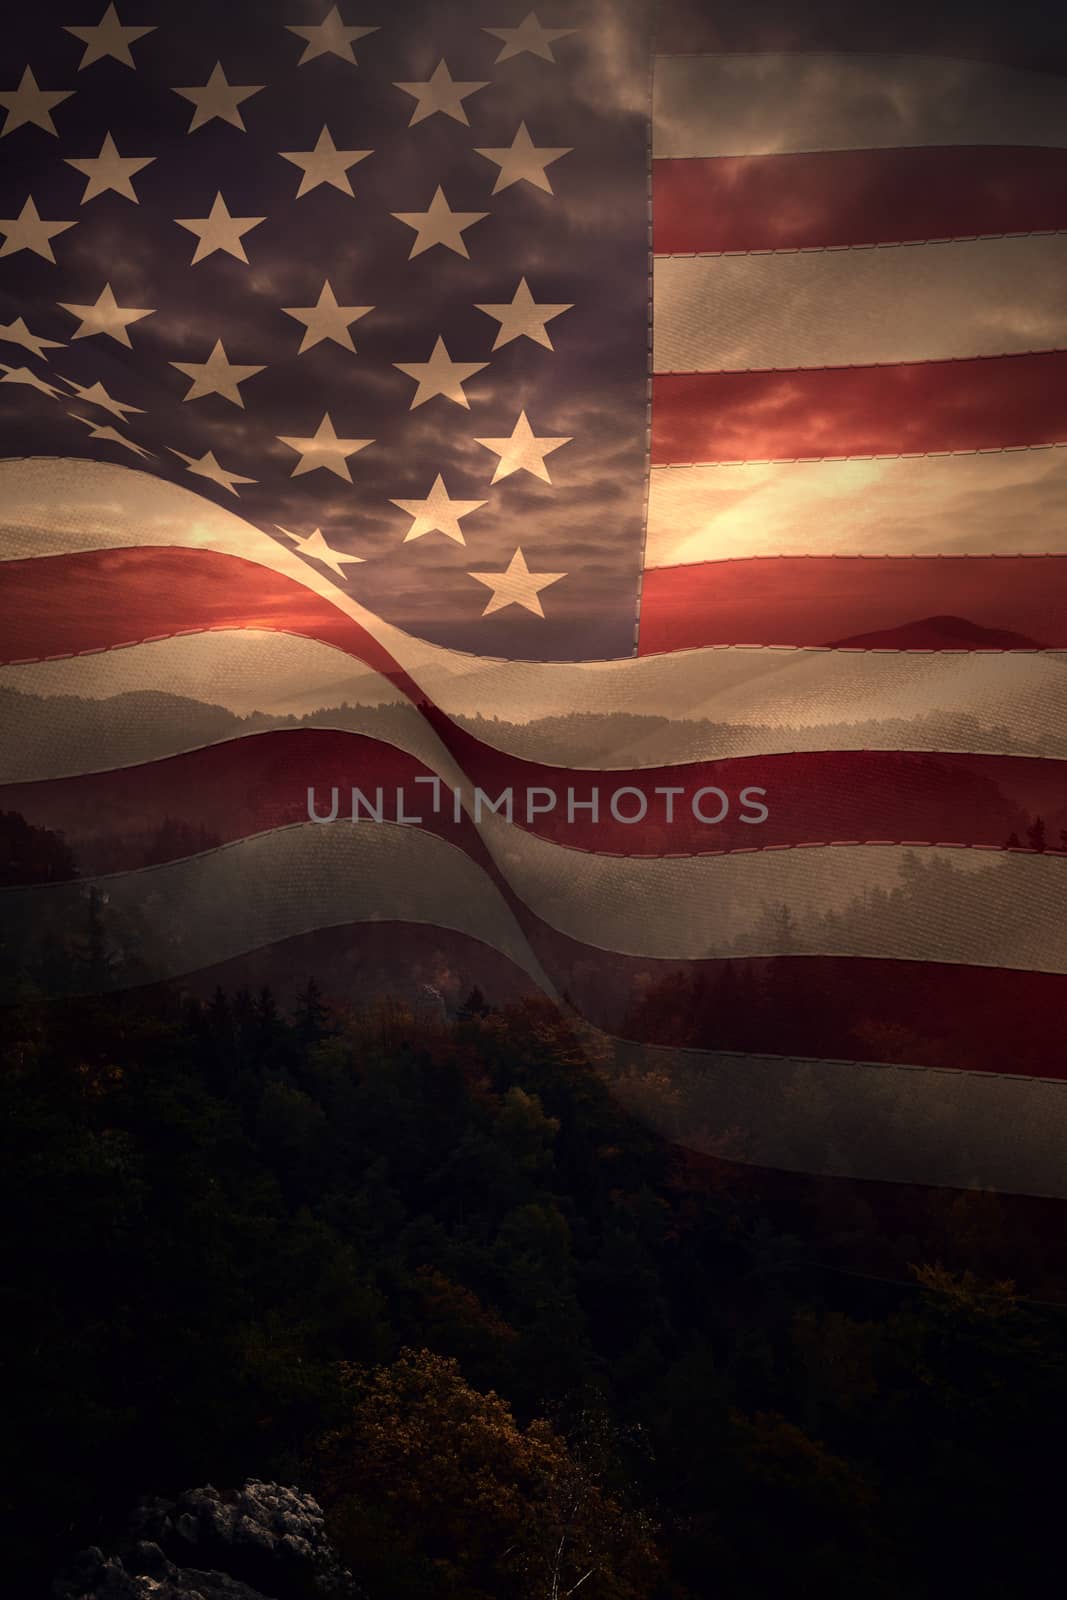 Digitally generated united states national flag against trees and mountain range against cloudy sky